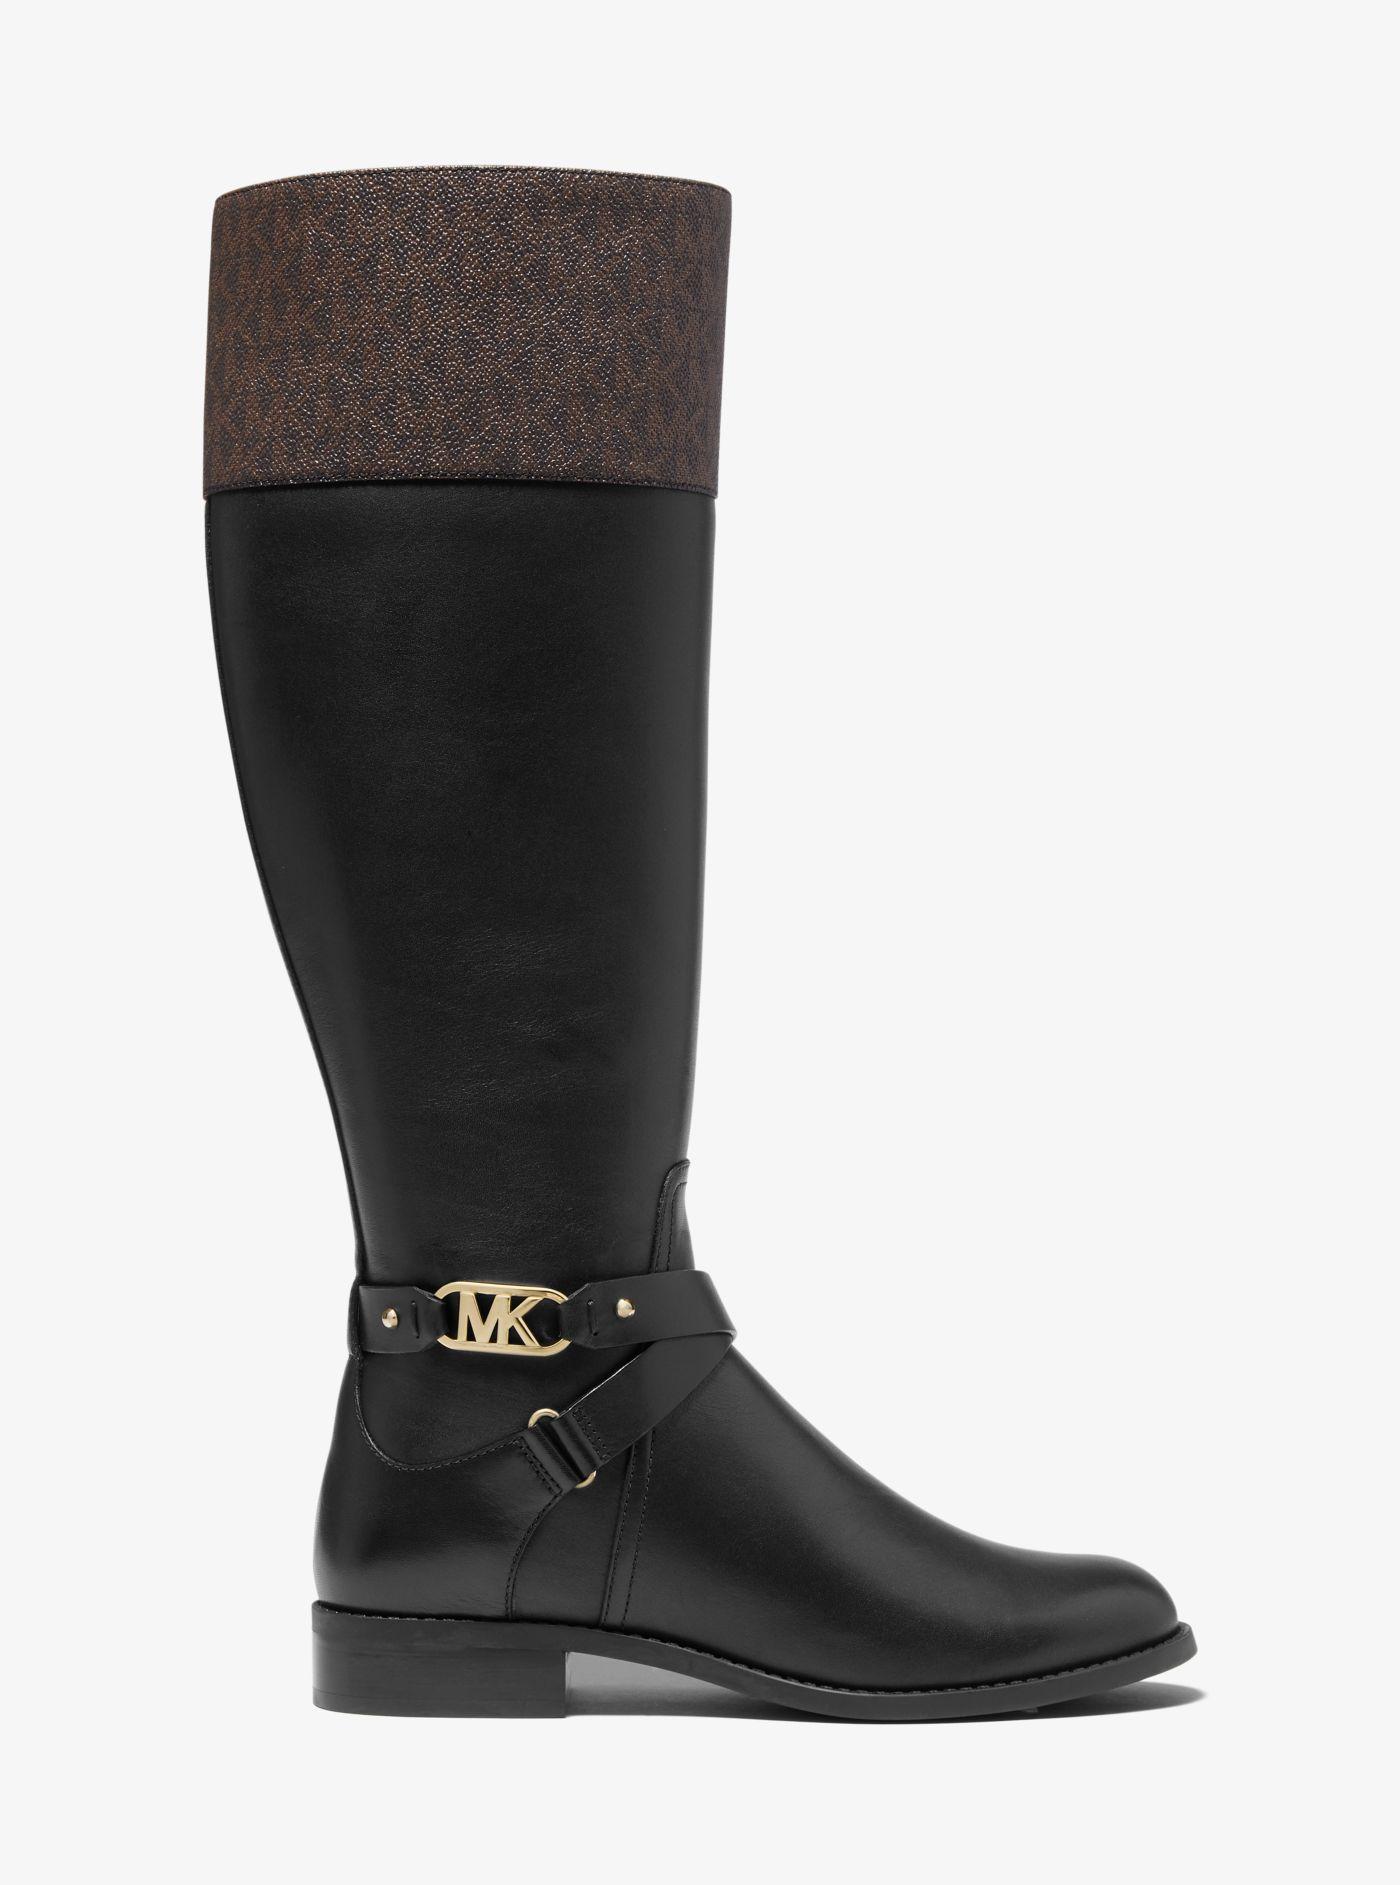 Michael Kors Kincaid Leather And Logo Riding Boot in Black - Lyst